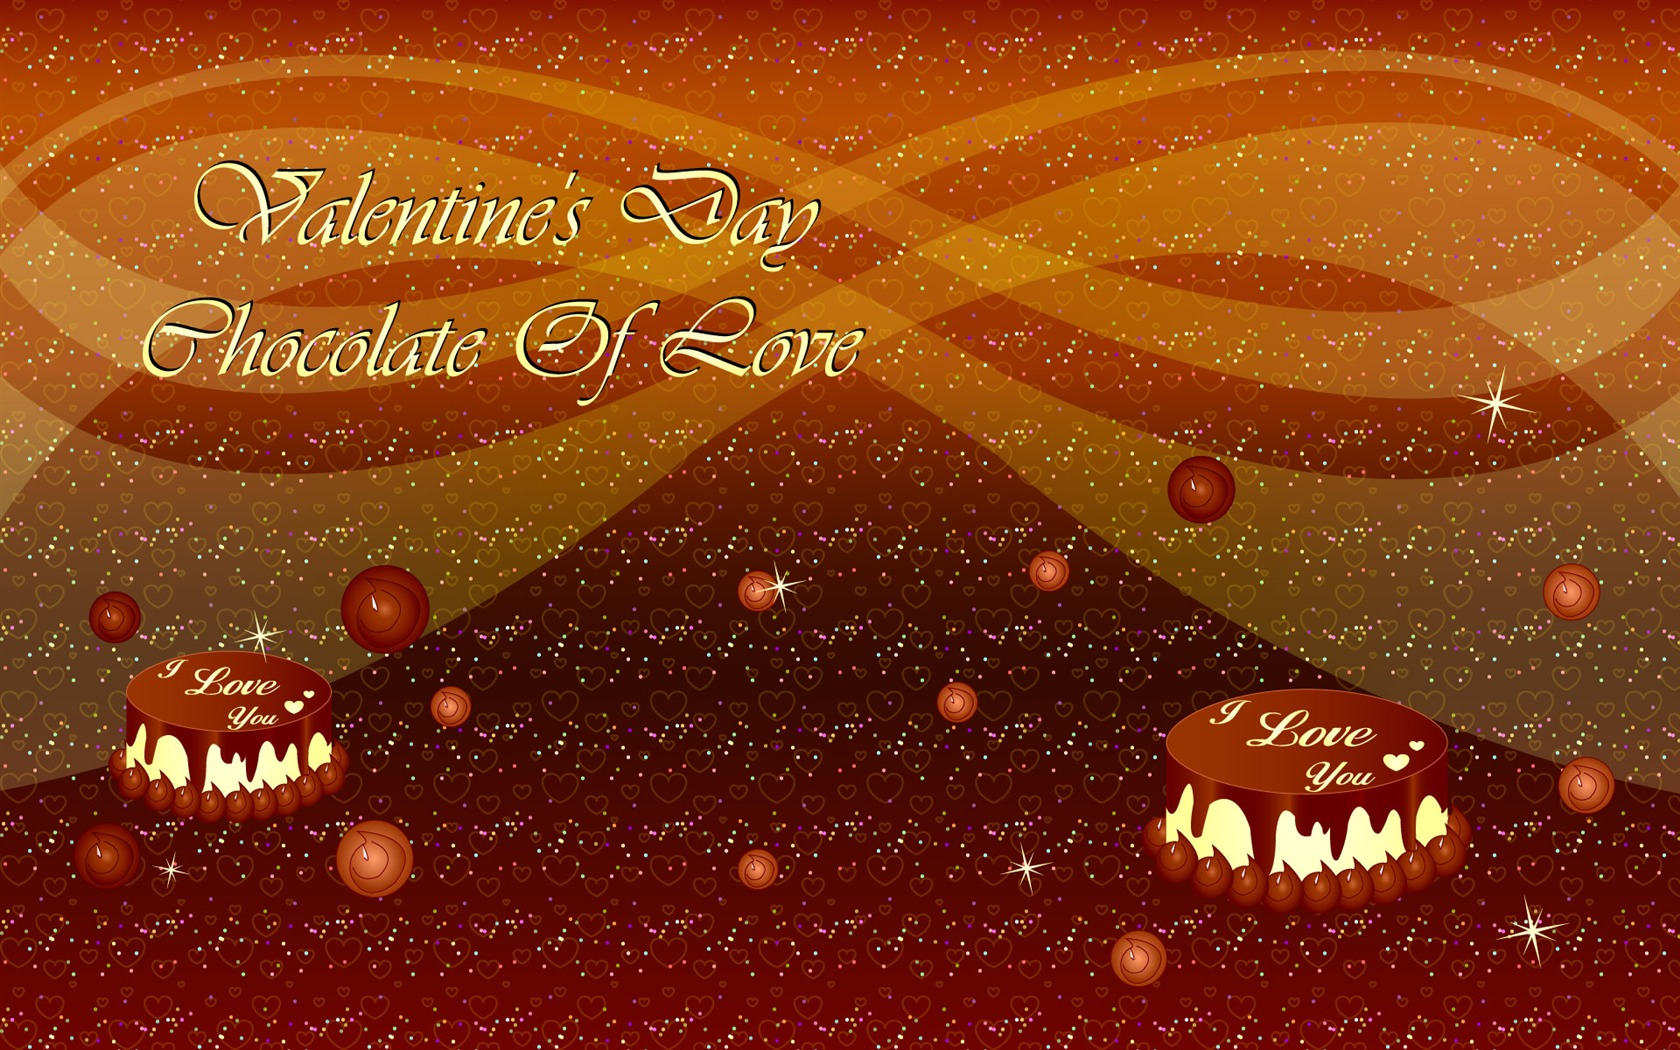 Valentine's Day Theme Wallpapers (2) #4 - 1680x1050